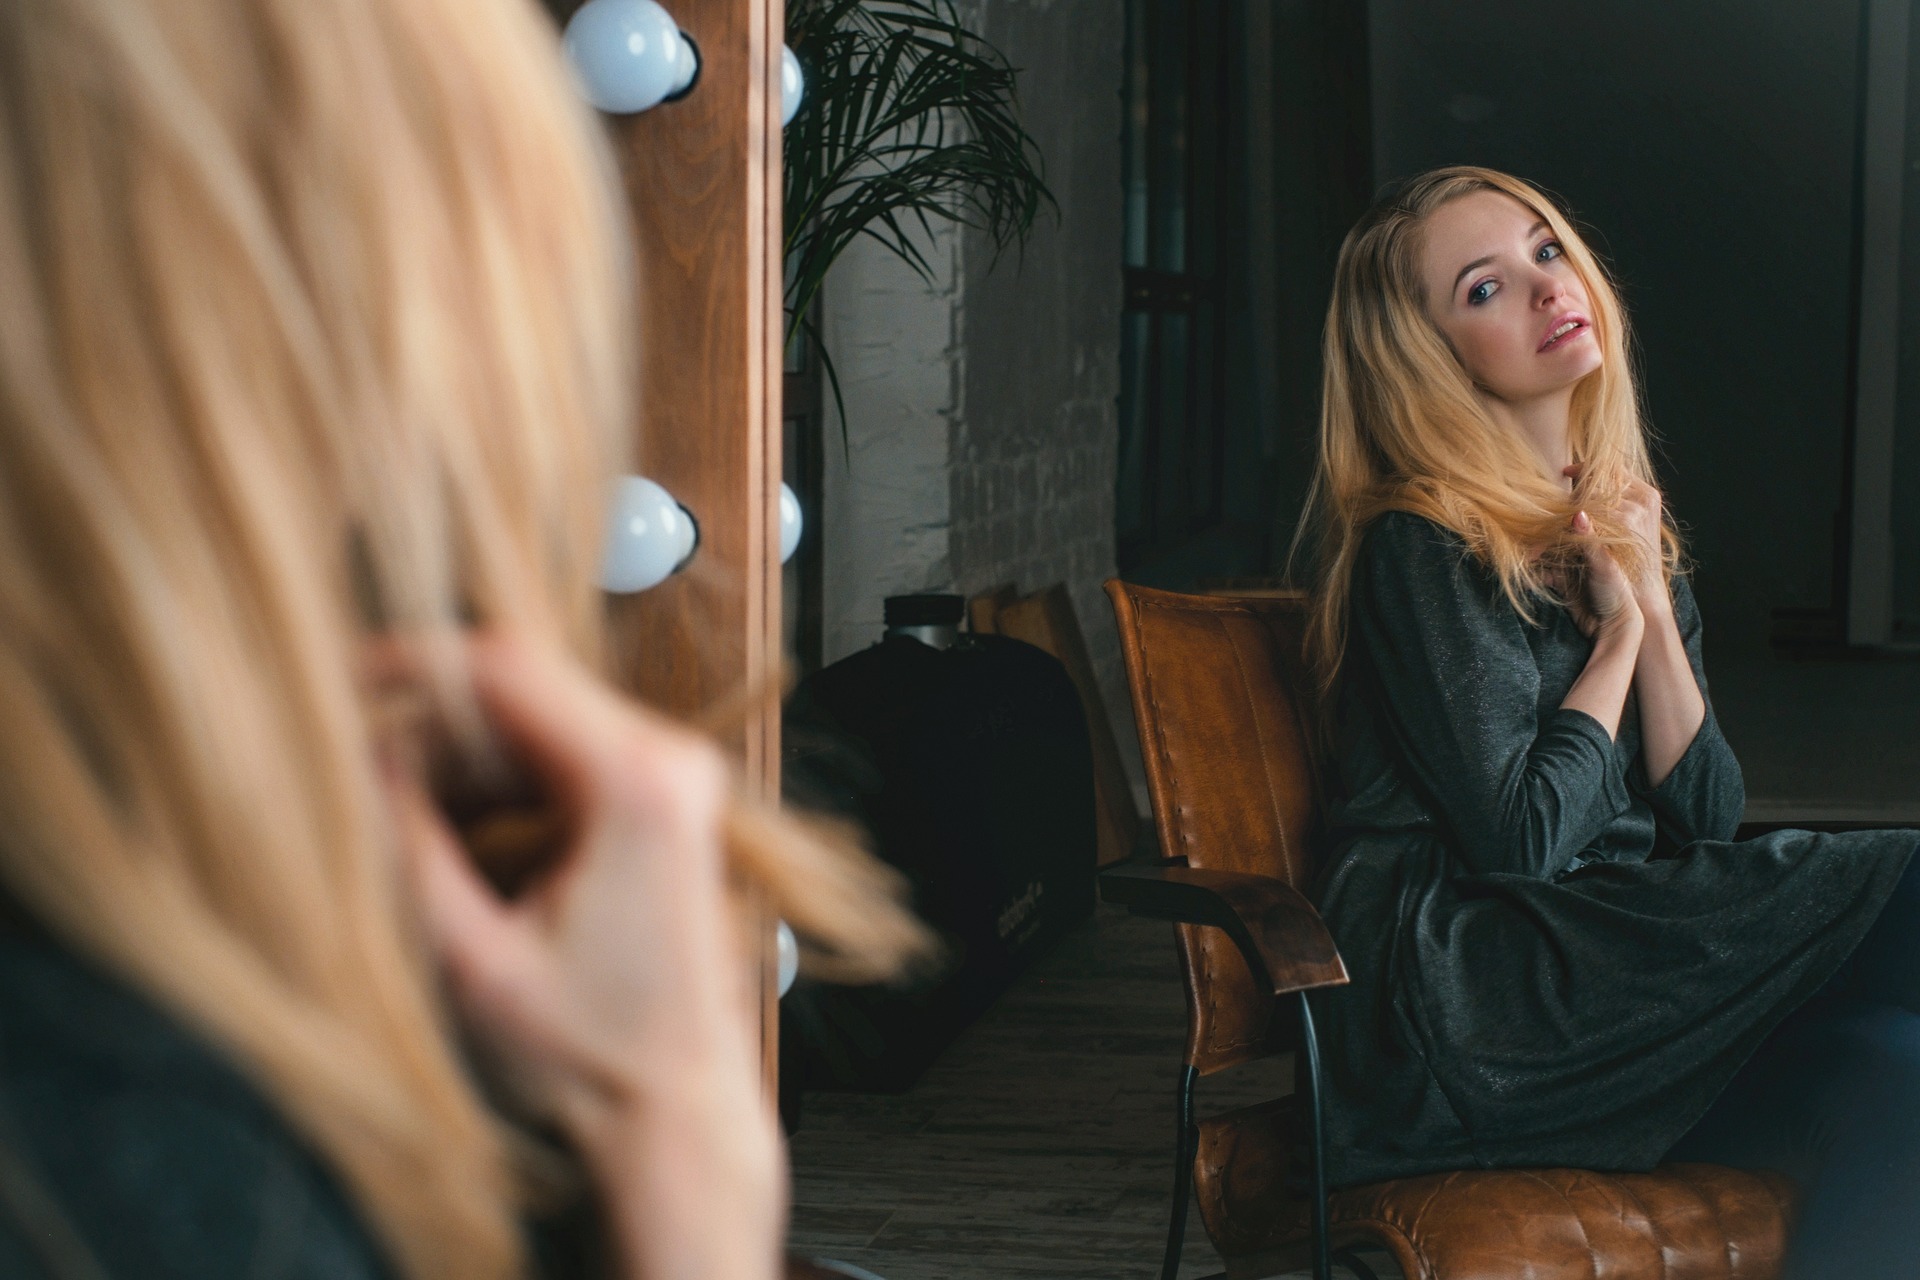 Blonde woman watching herself lovingly in the mirror